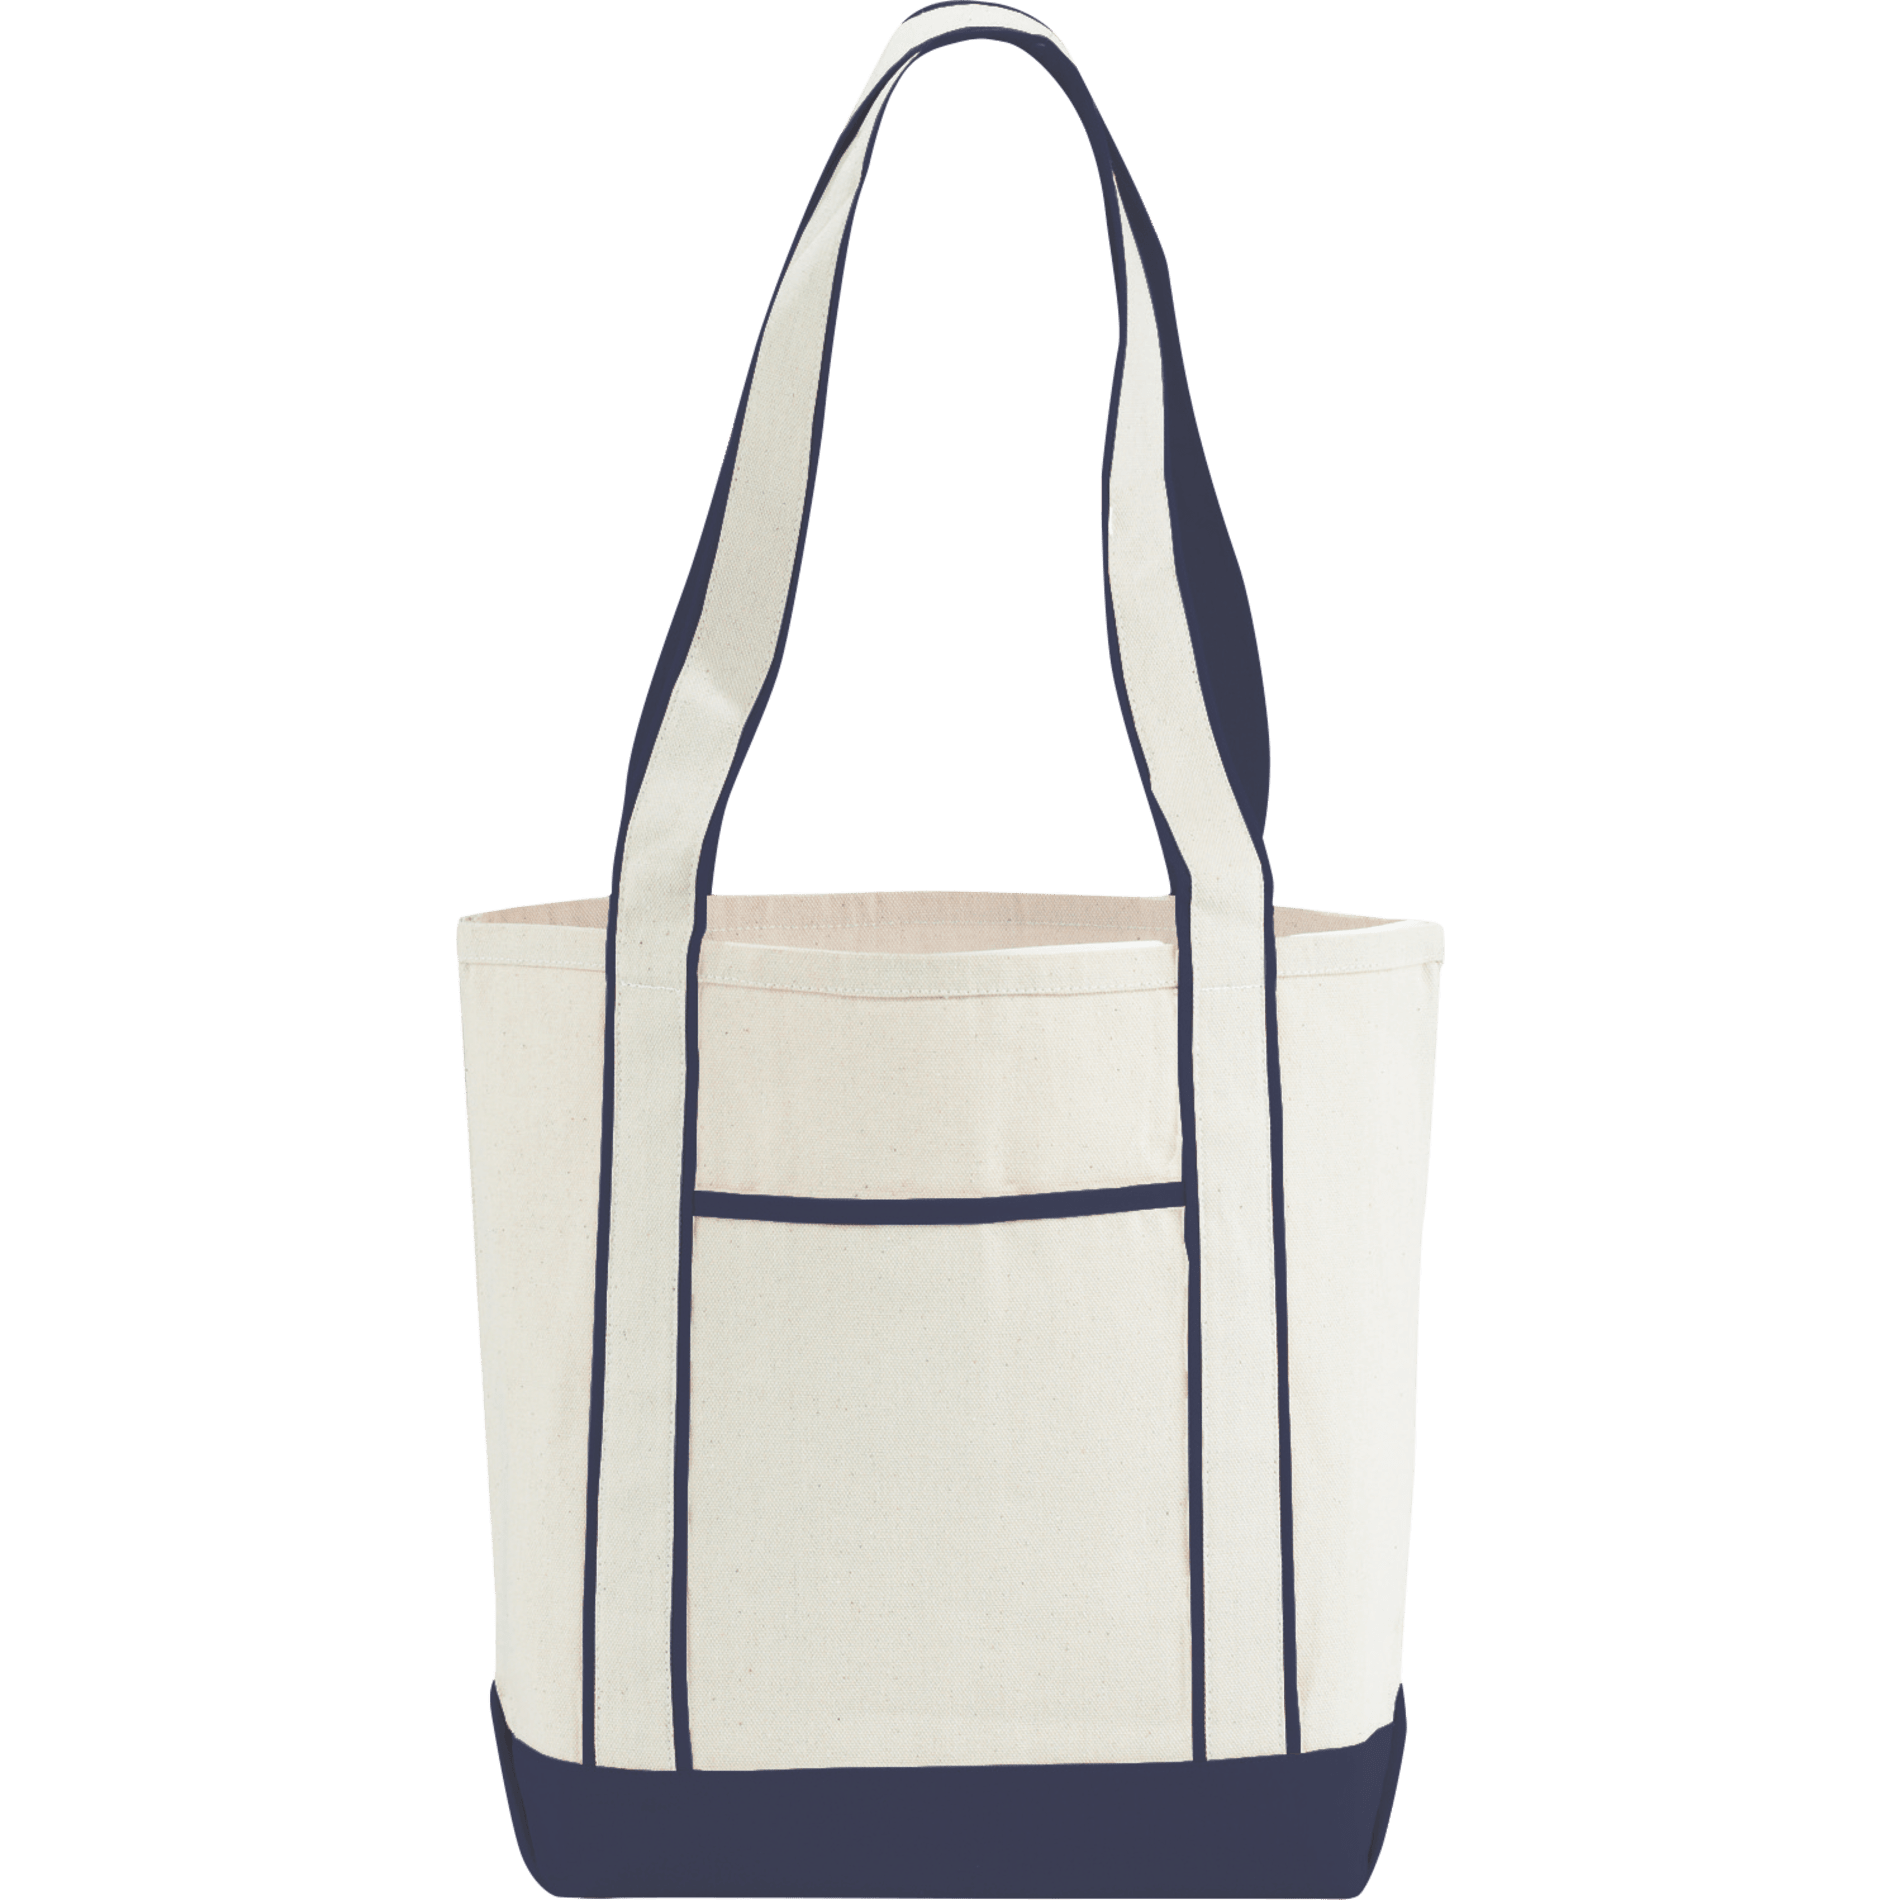 LEEDS 7900-06 - Topsail 10oz Cotton Canvas Boat Tote